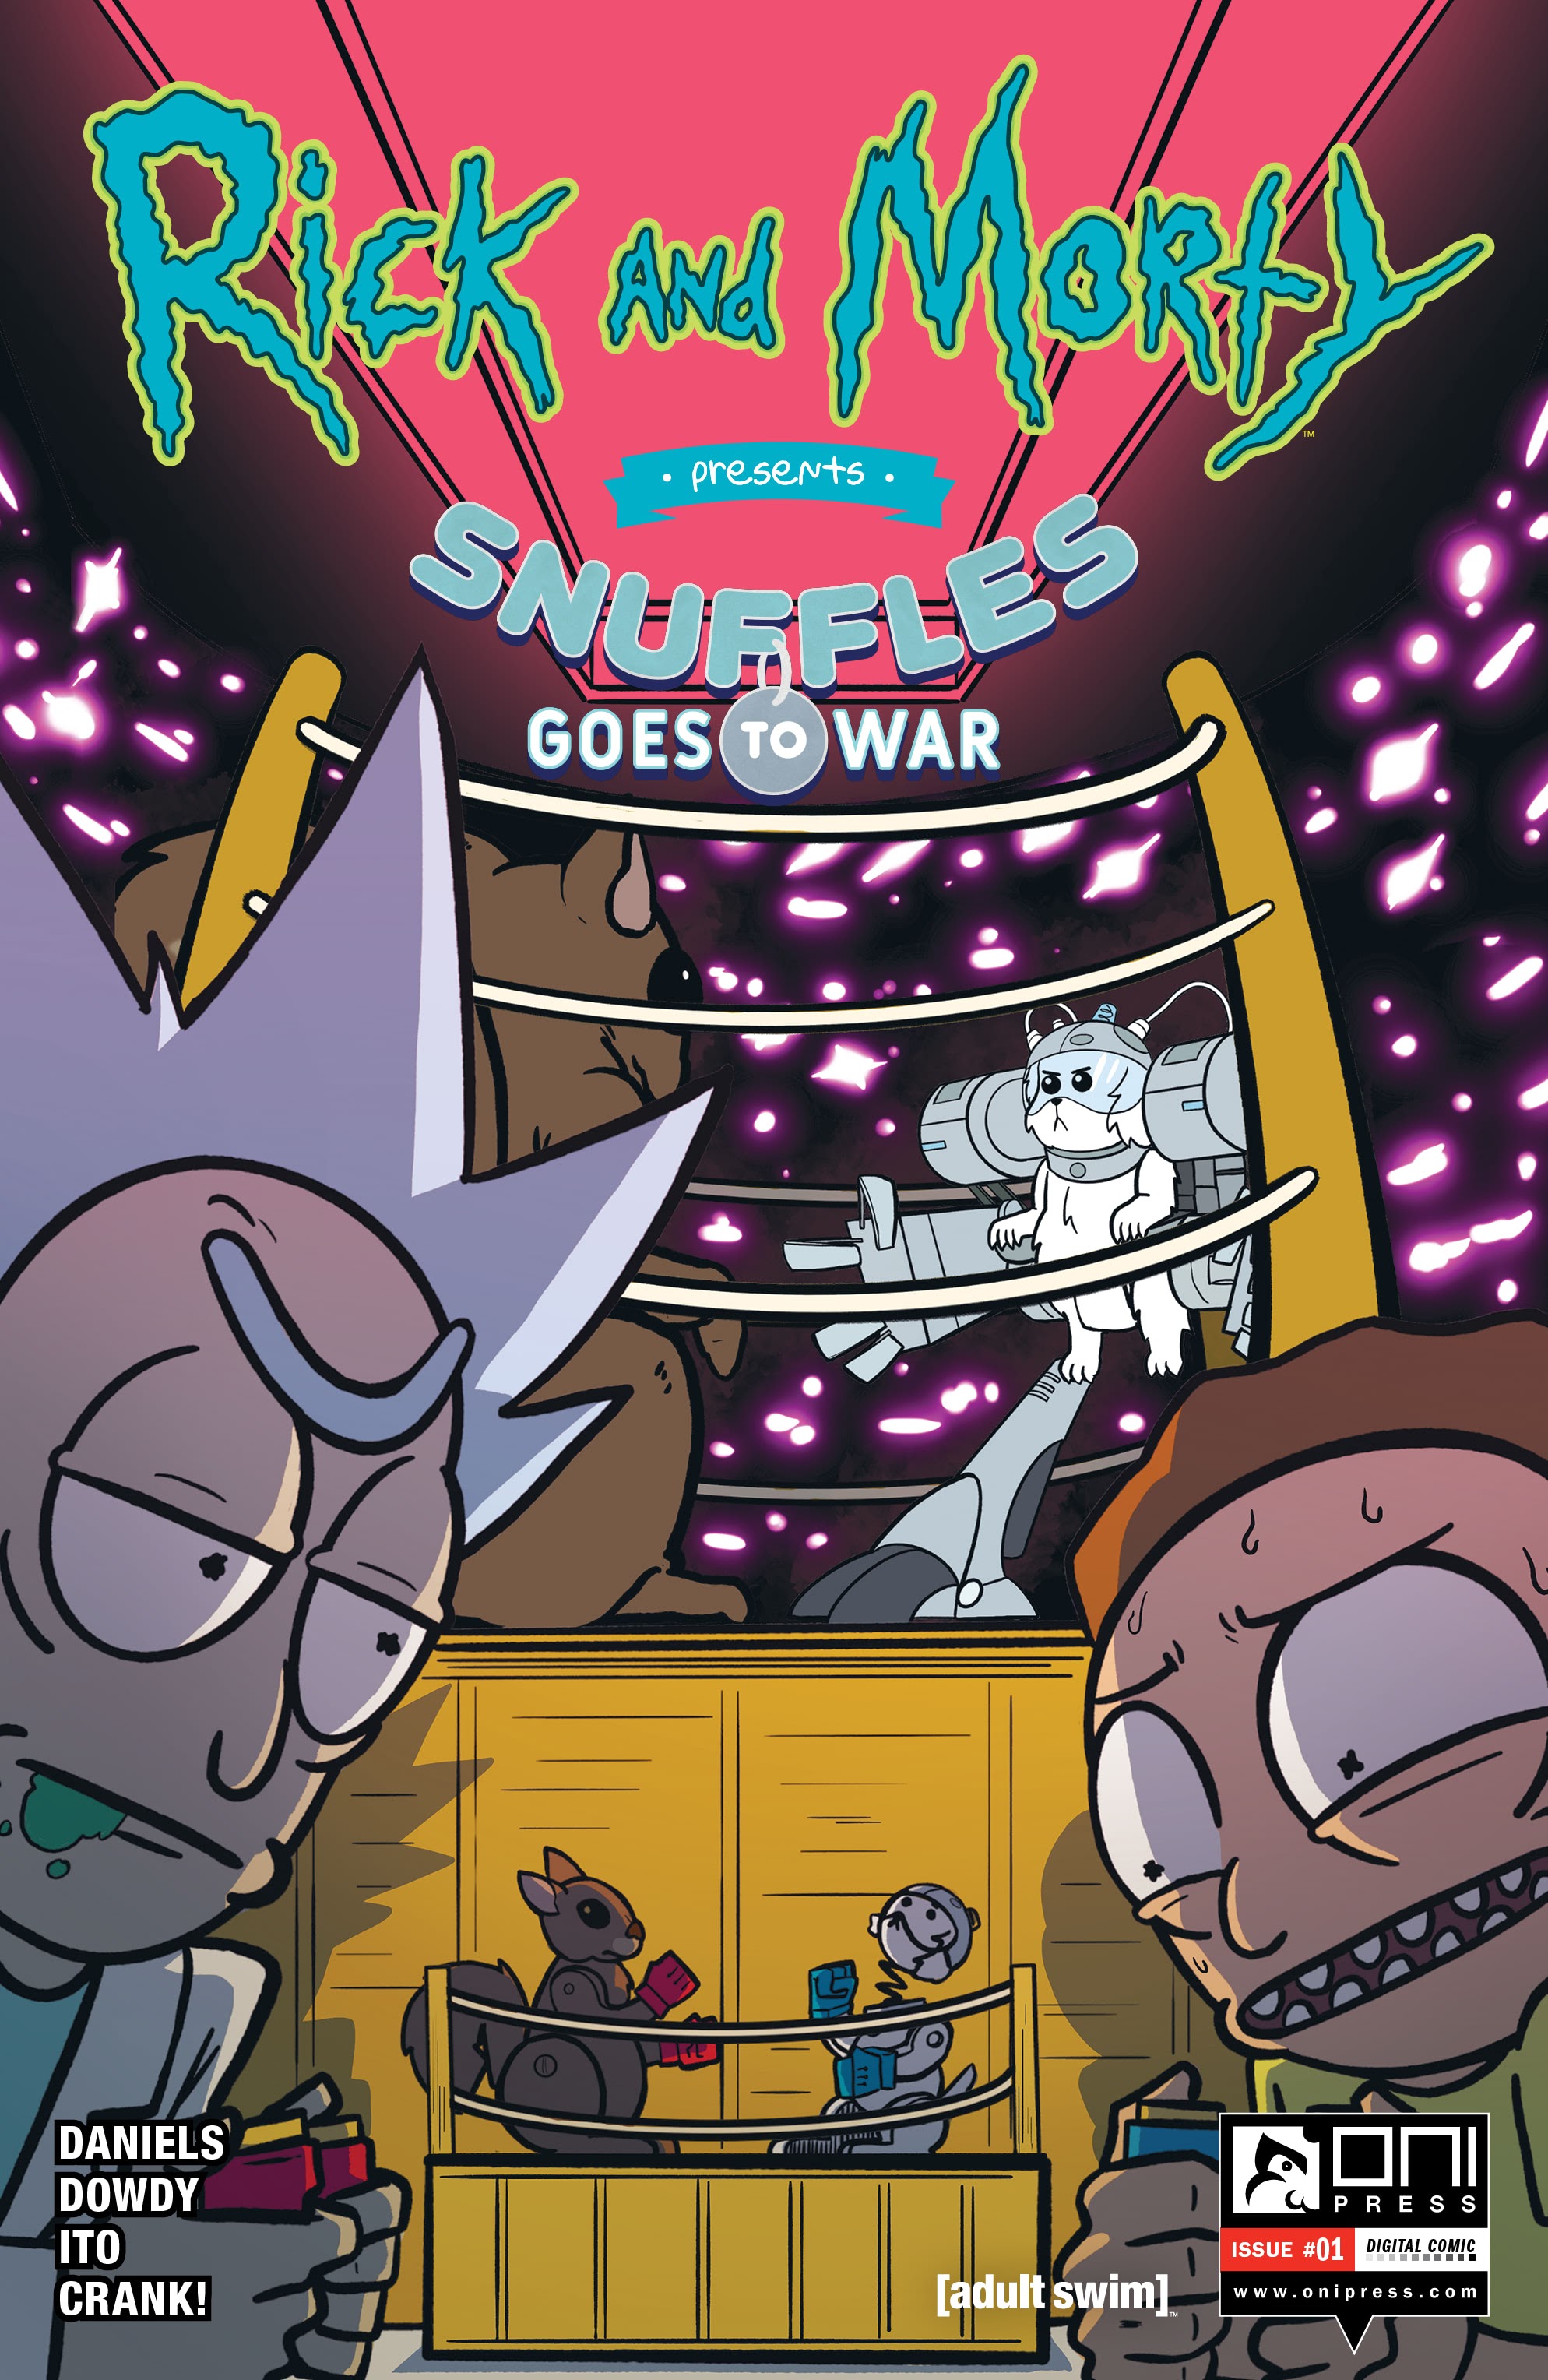 Read online Rick and Morty Presents: Snuffles Goes to War comic -  Issue # Full - 1